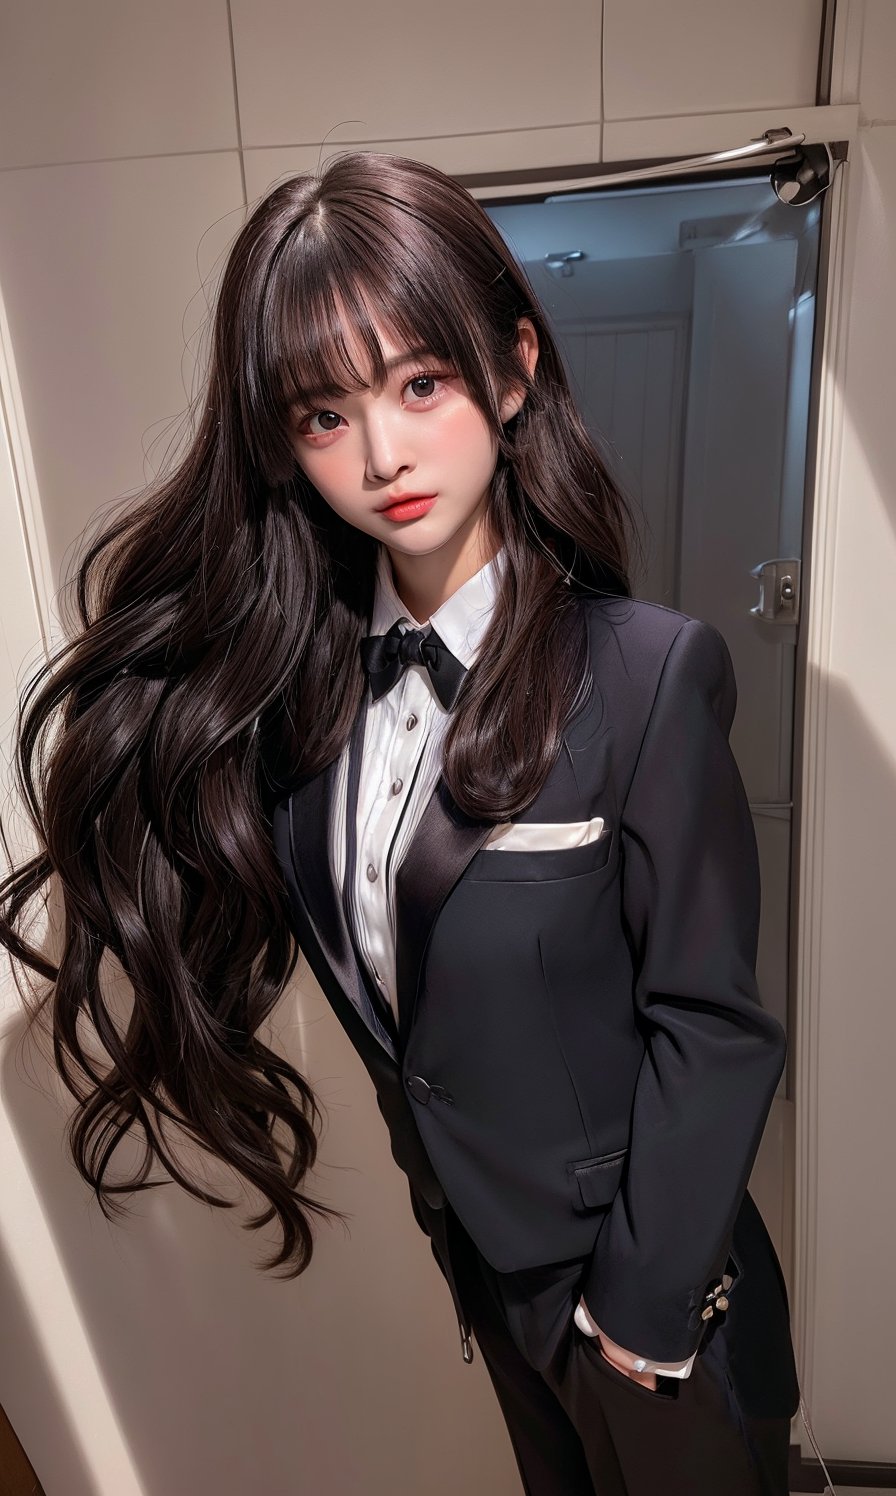 ((((Top_button_collared_Tuxedo_suit:1.5)))),(((Tuxedo_bow_tie:1.4))),((((long_slack_pant:1.4)))),(((((looking_at_viewer,front_viewed:1.5))))),((((standing)))),(((((long_hair_with_complete_bangs:1.6))))),(((beautiful and aesthetic:1.4))),(((((happy_face:1.6))))),((((round cheeks, high-bridged nose:1.5)))),(((((girl_room:1.5))))),
perfect.,Bomi,Enhance,Model ,Asian ,eungirl,((((1girl)))).,((Perfect lips)).,1 girl,perfect light